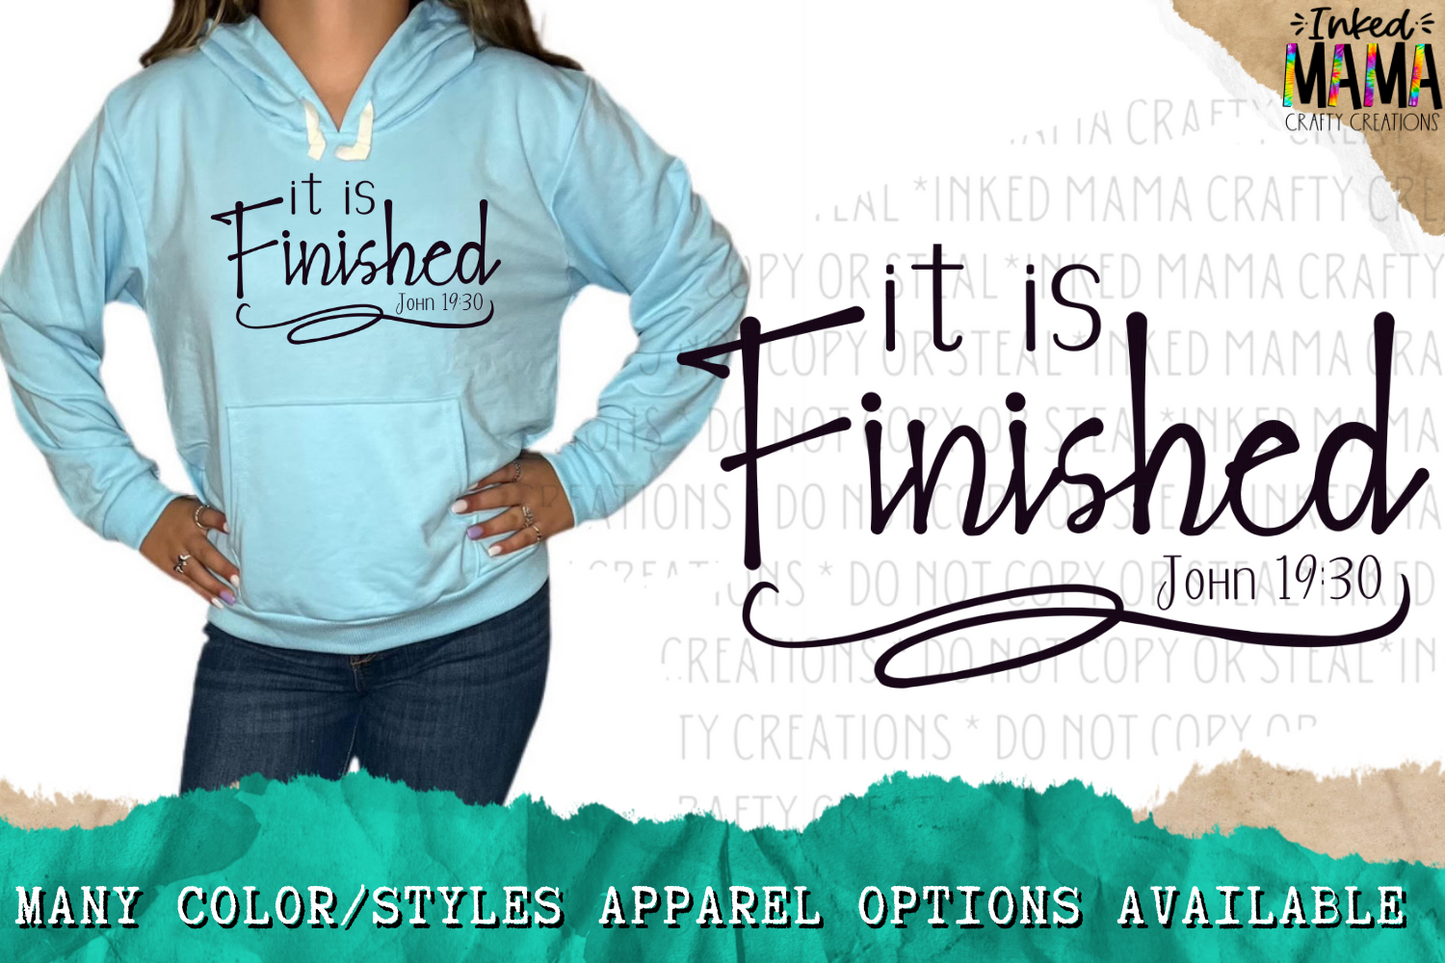 It is Finished John 19:30 -  Easter Faith based - Apparel